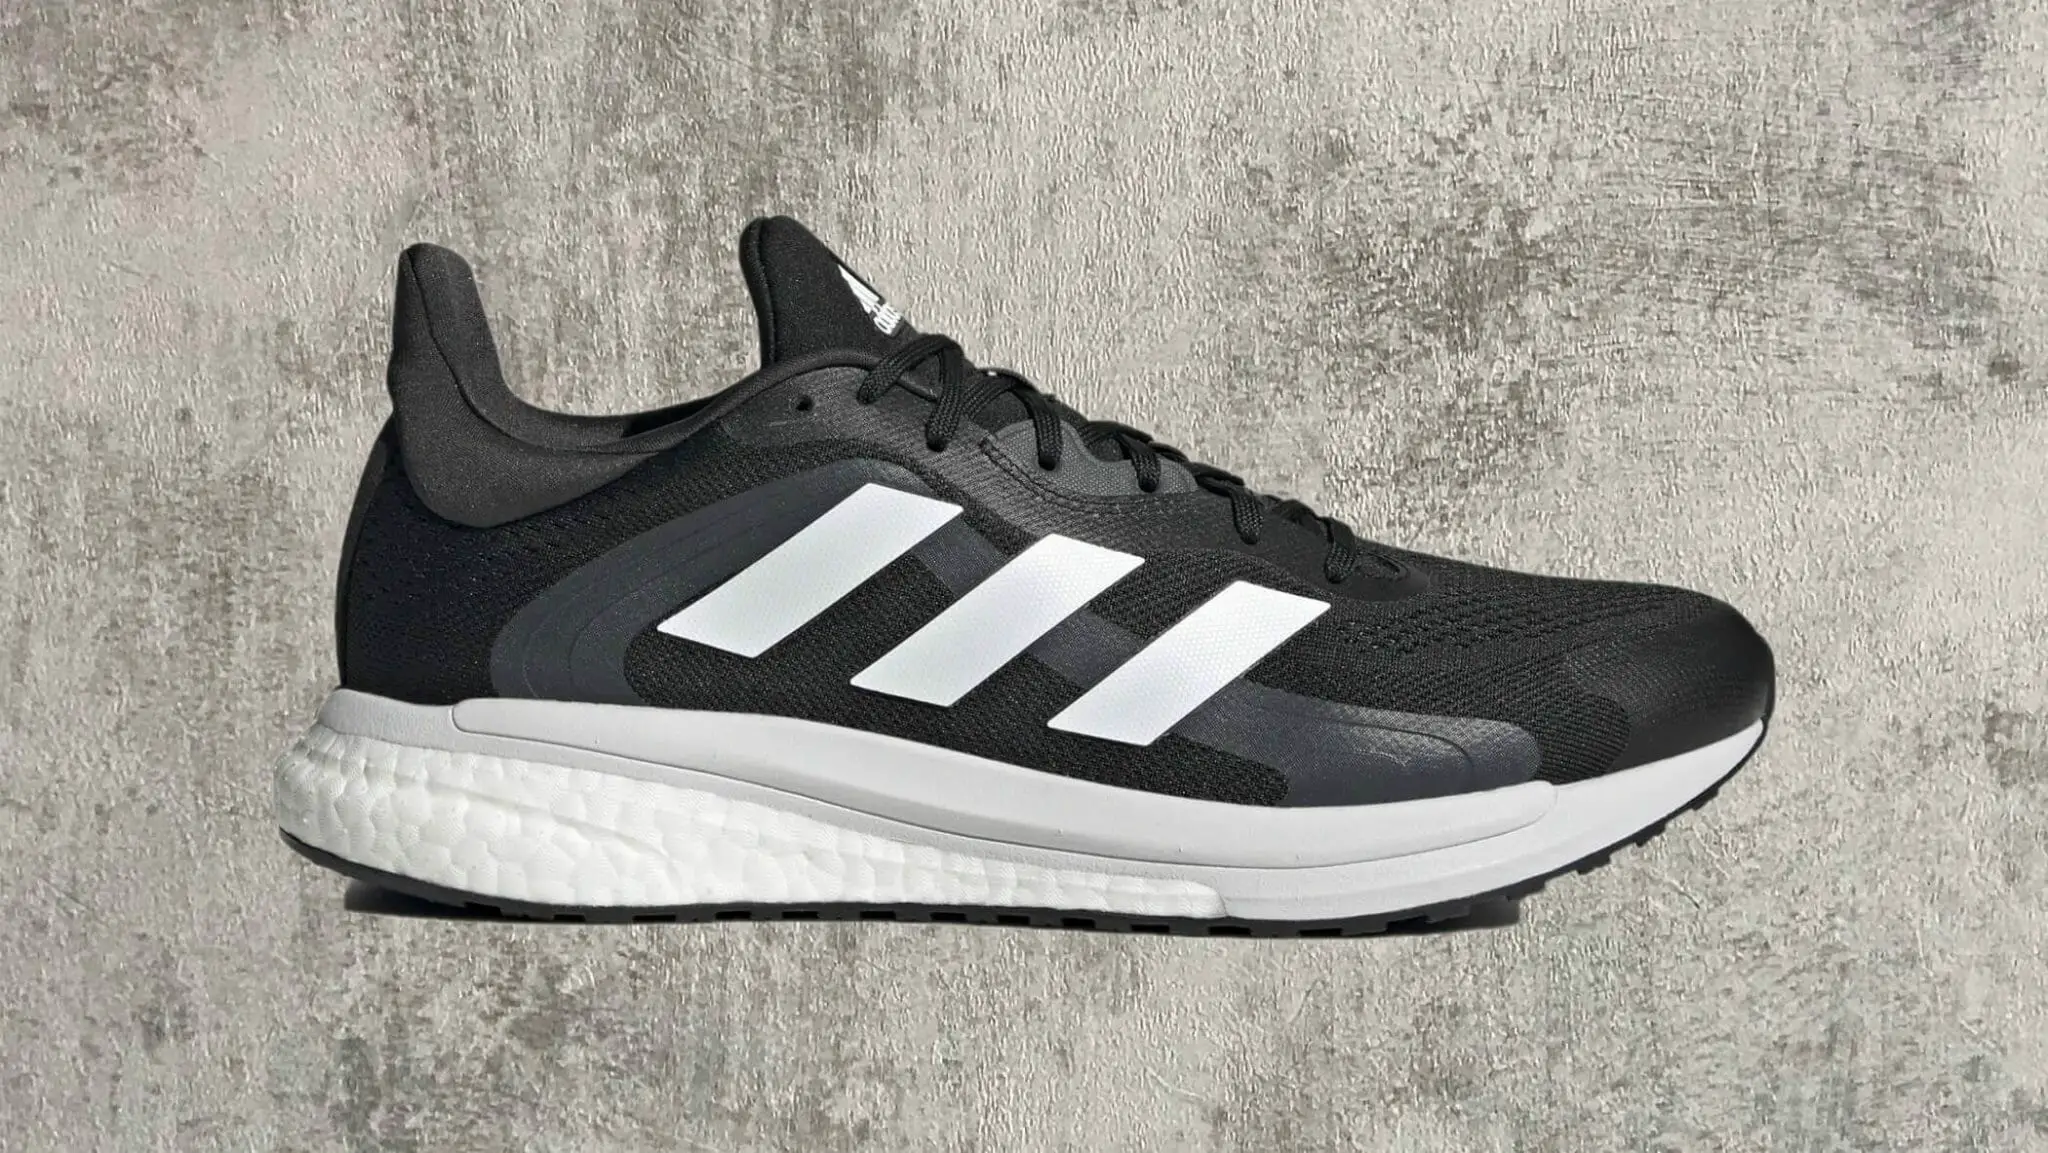 adidas Solarglide 4 stability and motion control shoe for fallen arches.